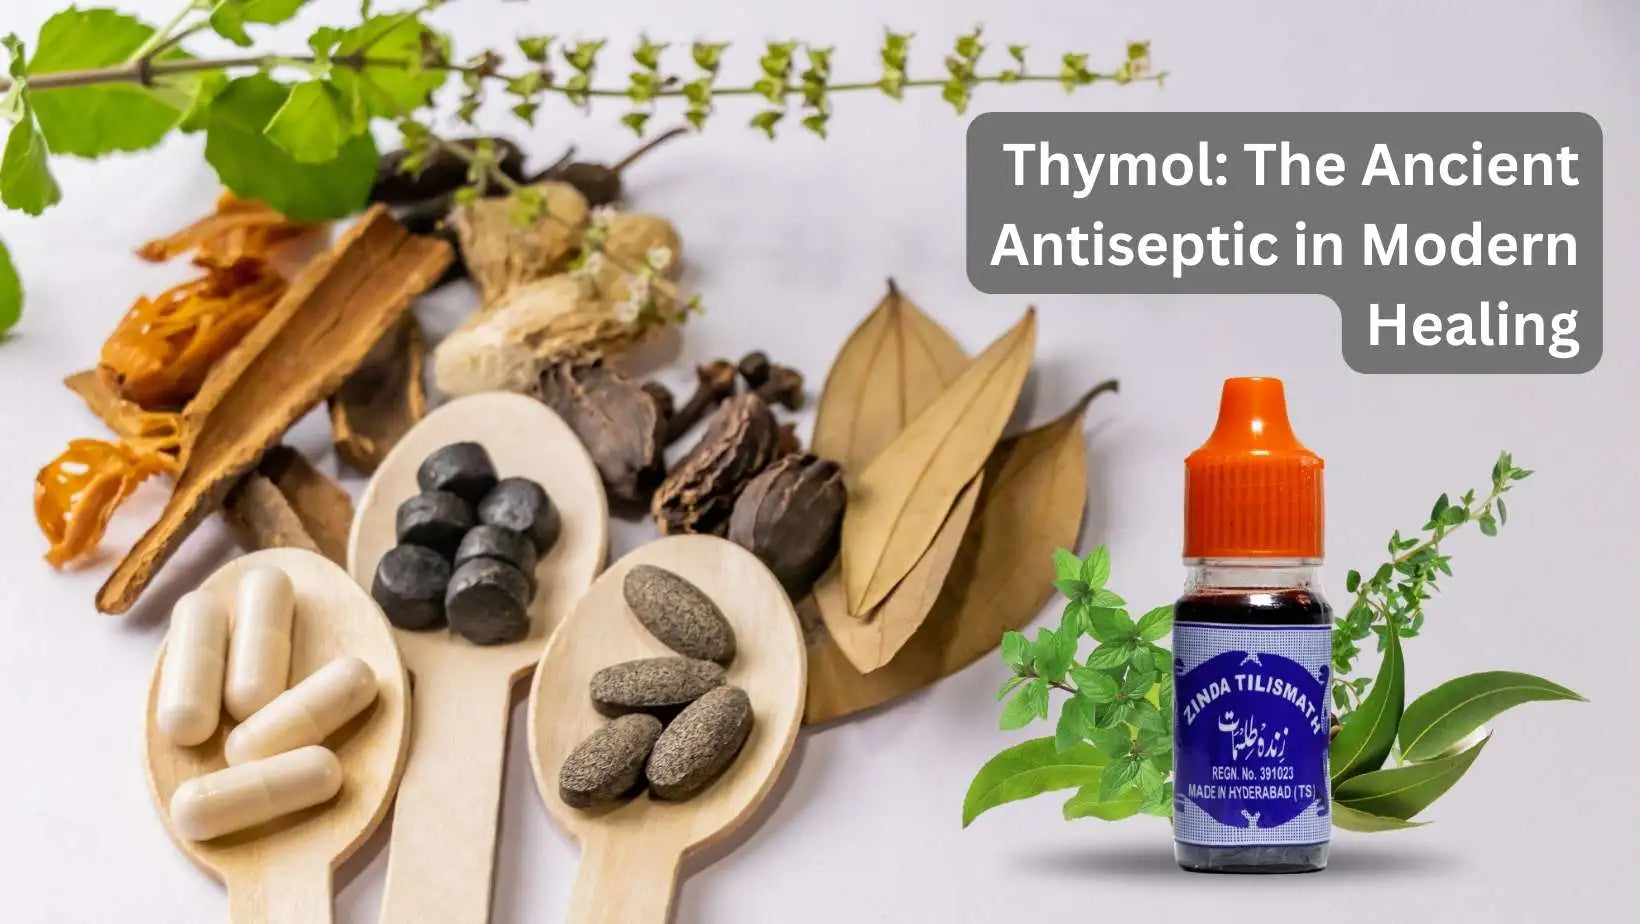 Thymol: The Ancient Antiseptic in Modern Healing